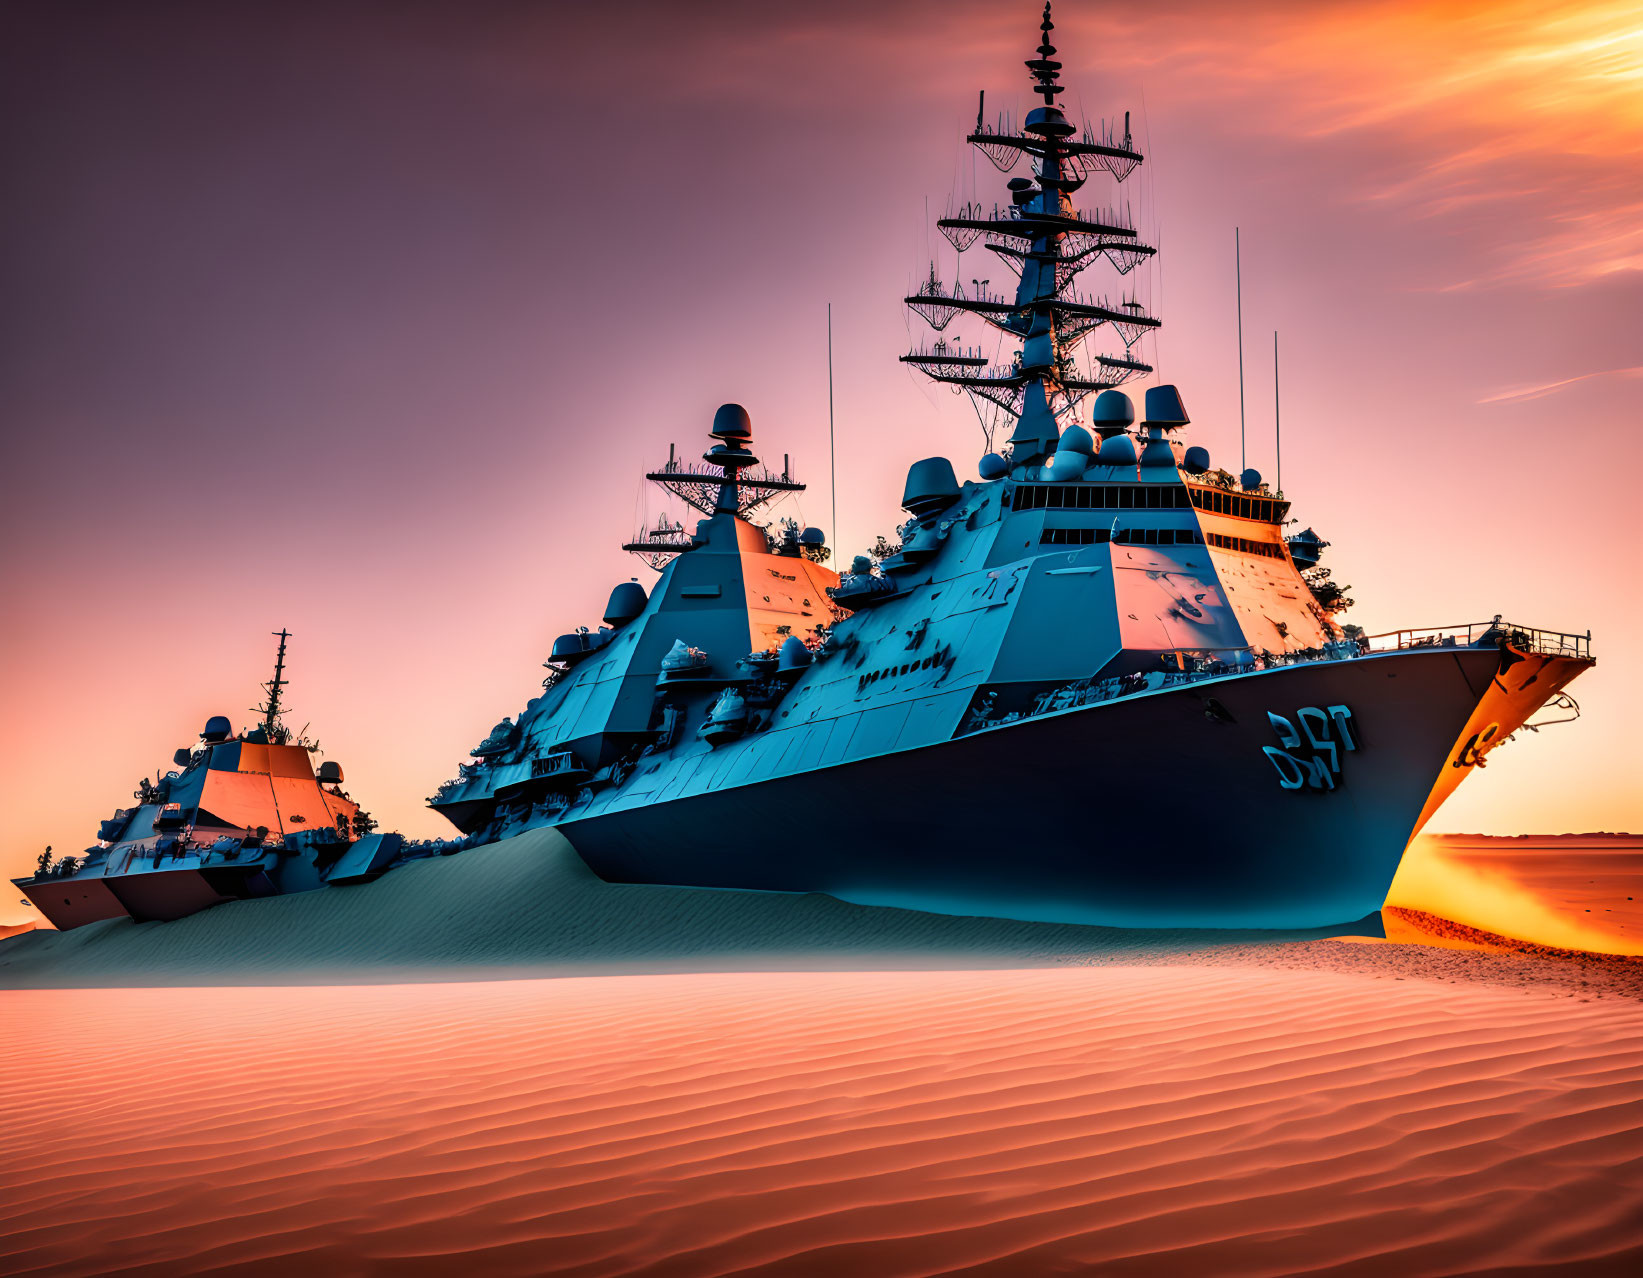 Military ships stuck in desert with dramatic sunset.